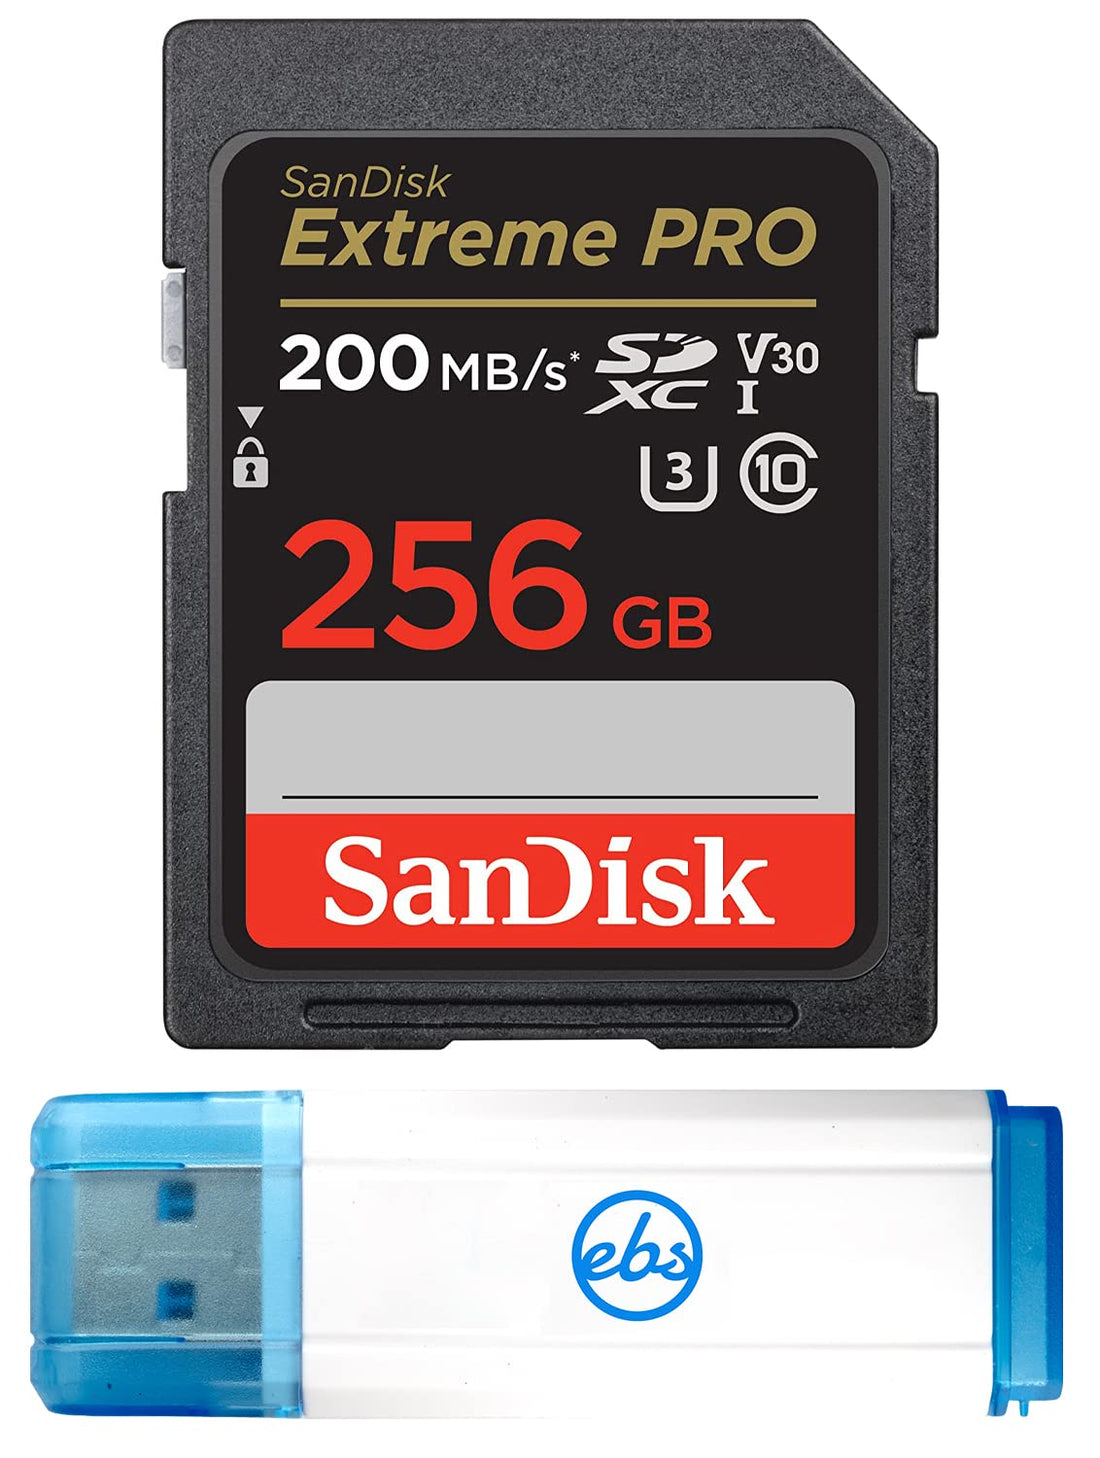 SanDisk Extreme Pro 256GB SD Card for Nikon Camera Works with Nikon Z50, Z5 Mirroless, D780 Digital DSLR (SDSDXXD-256G-GN4IN) Bundle with 1 Everything But Stromboli 3.0 Micro & SD Card Reader